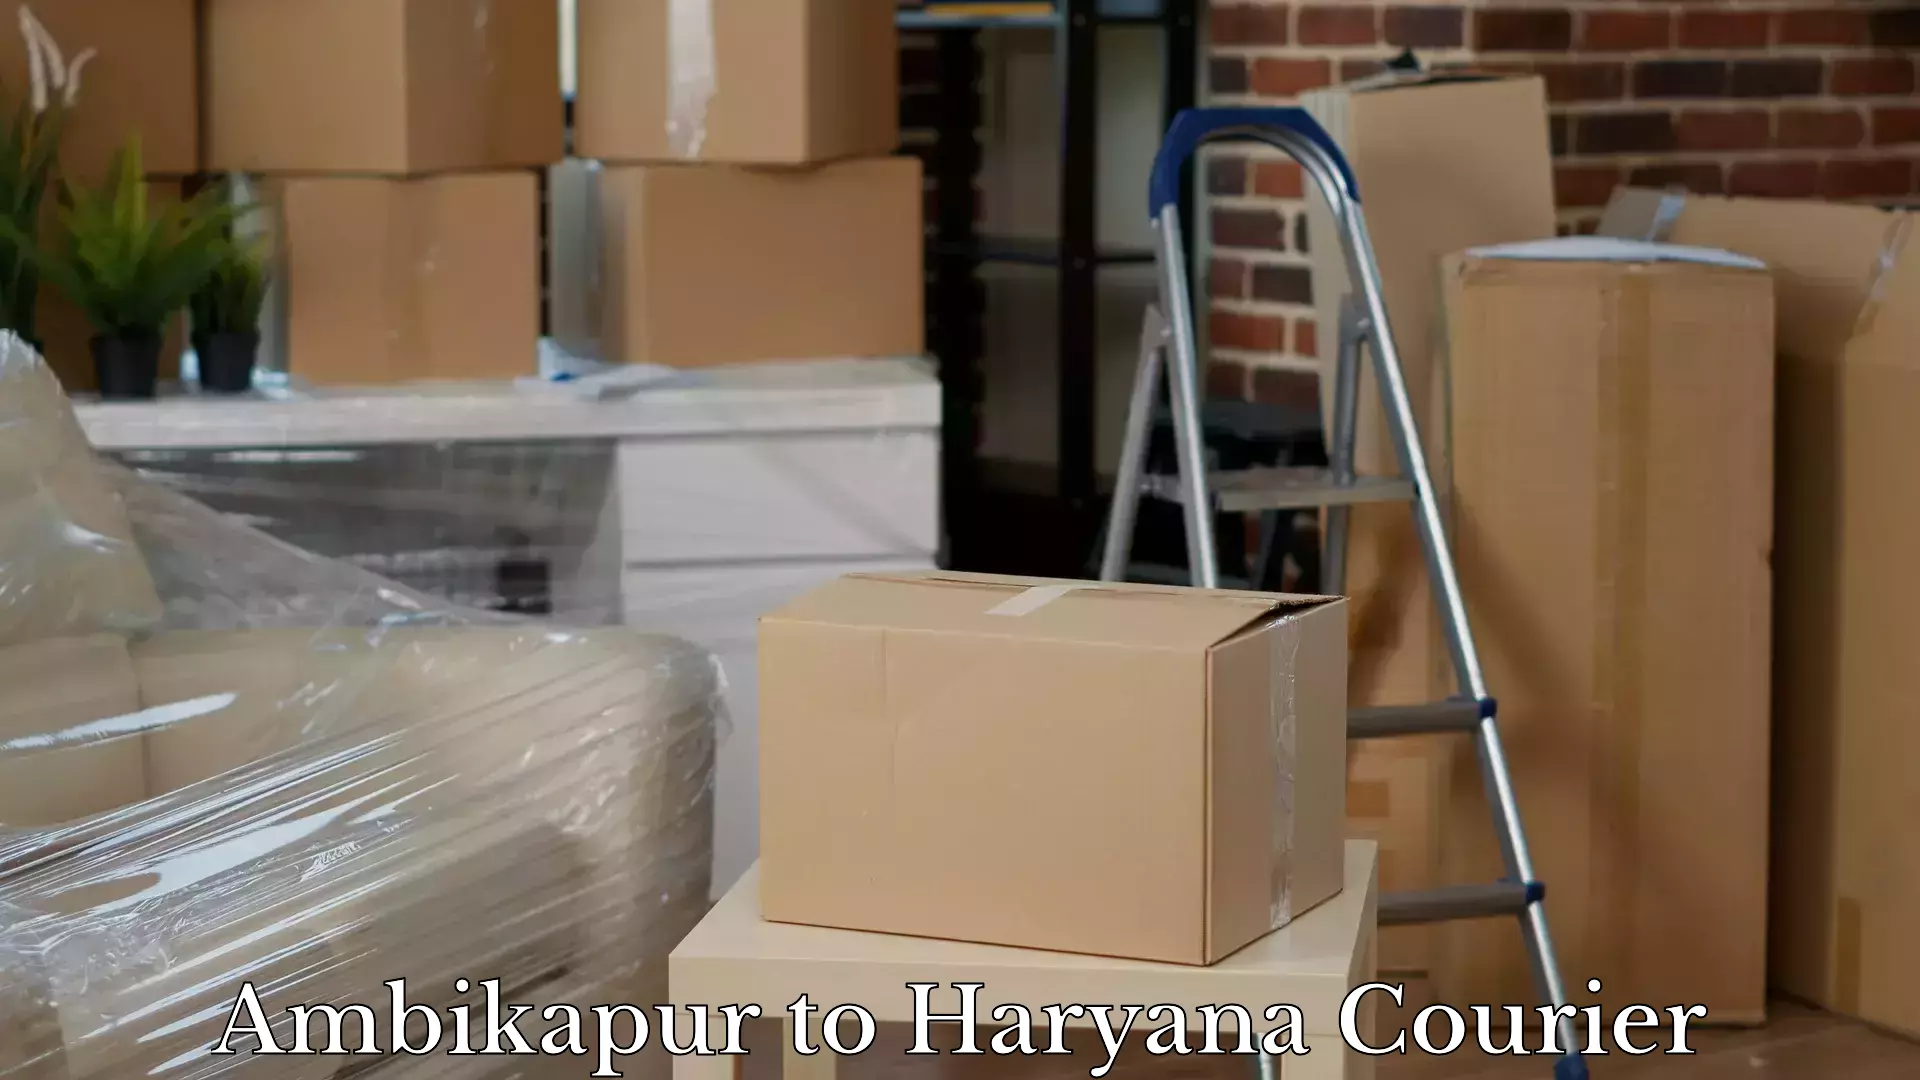 Instant baggage transport quote Ambikapur to Faridabad